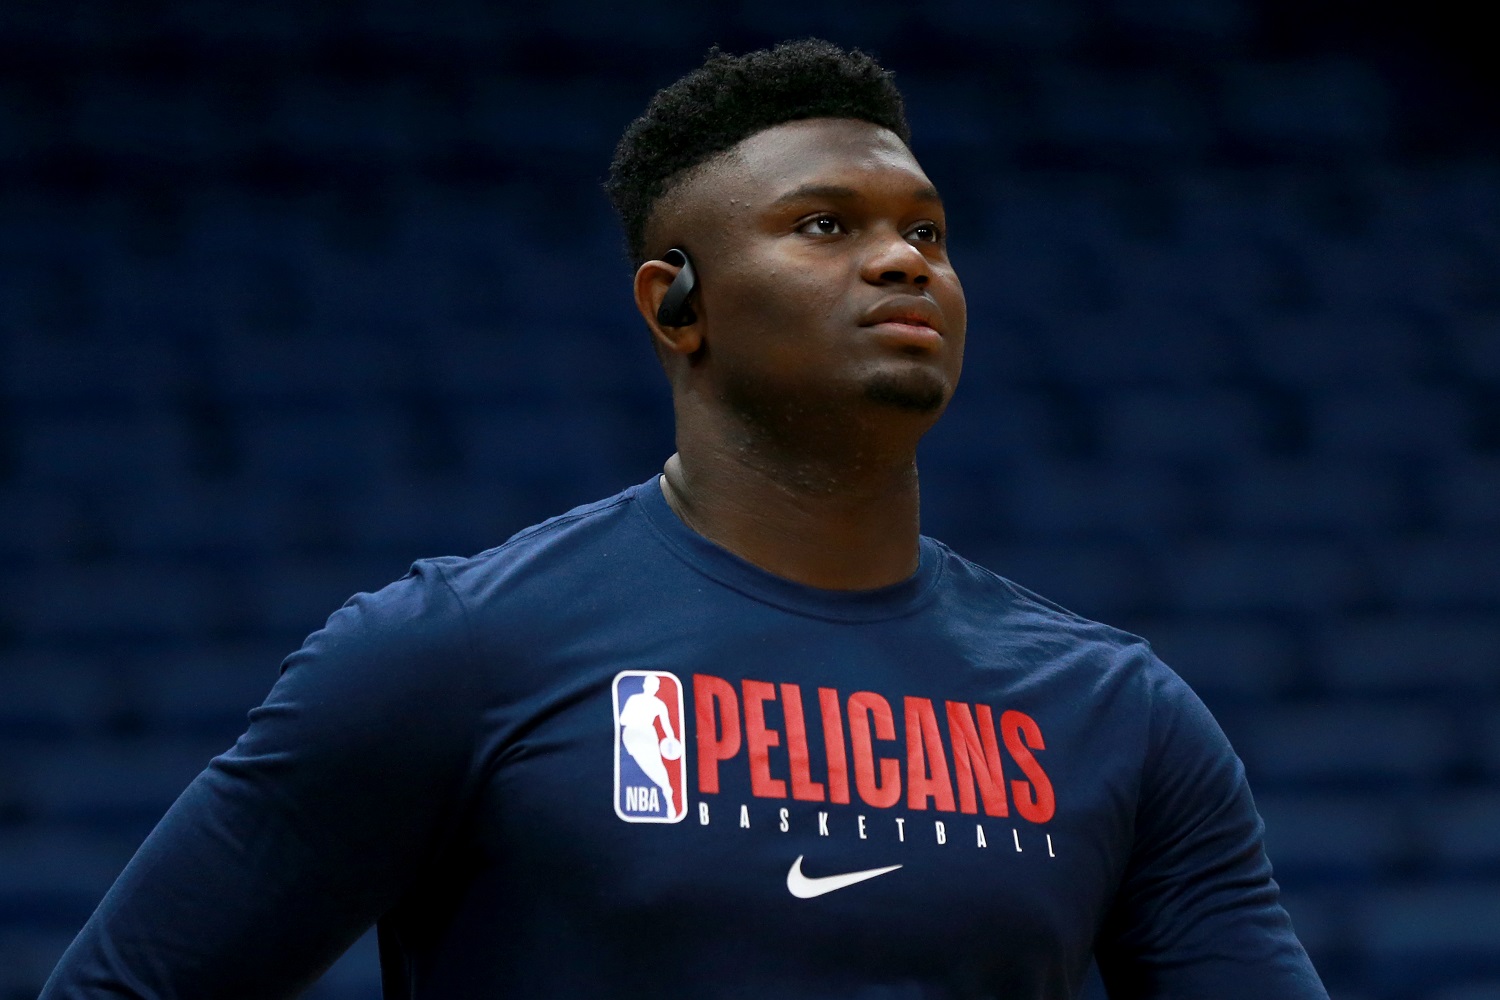 Pelicans Can’t Stop Buzzing About Zion Williamson